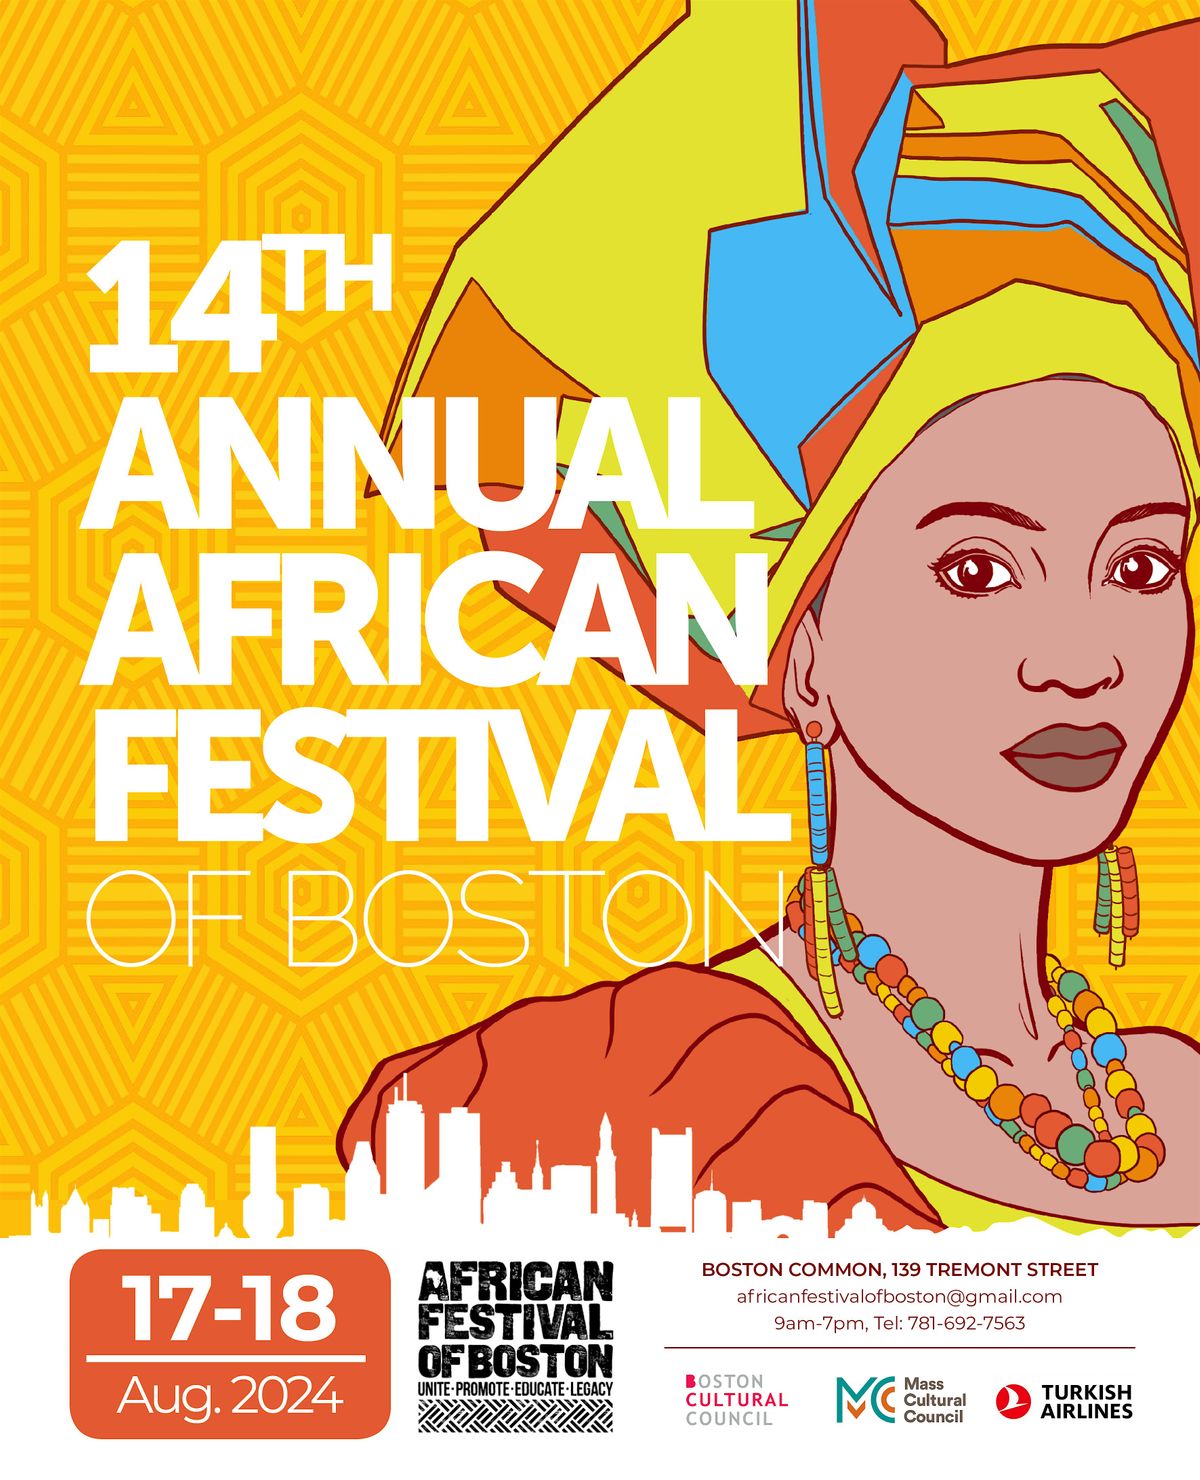 The 14th Annual African Festival of Boston